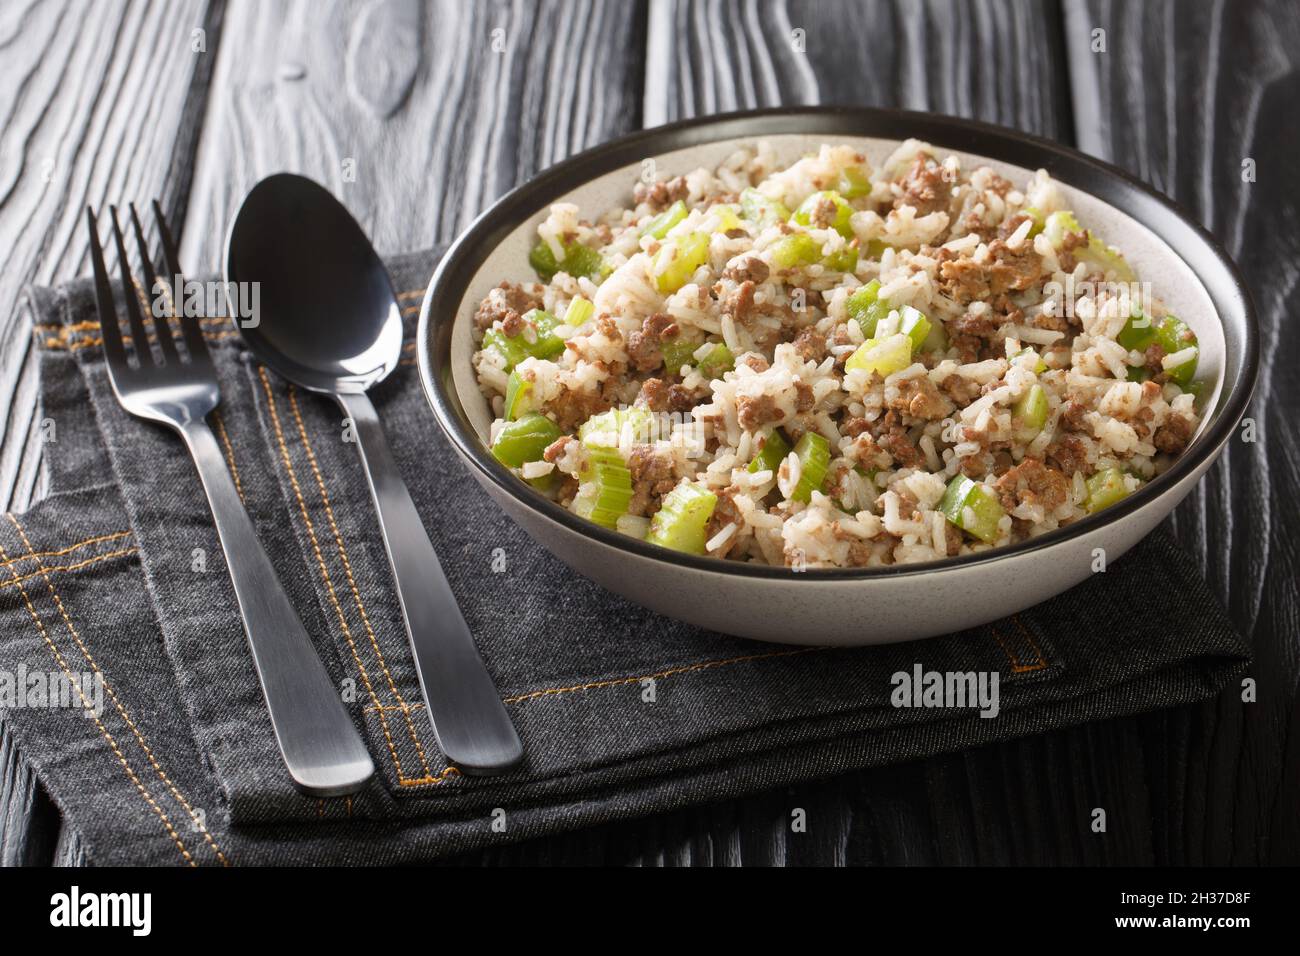 Dirty Rice is a delicious savory classic Cajun dish that gets its flavor from ground meat, cajun seasonings, and aromatic vegetables close-up in a pla Stock Photo